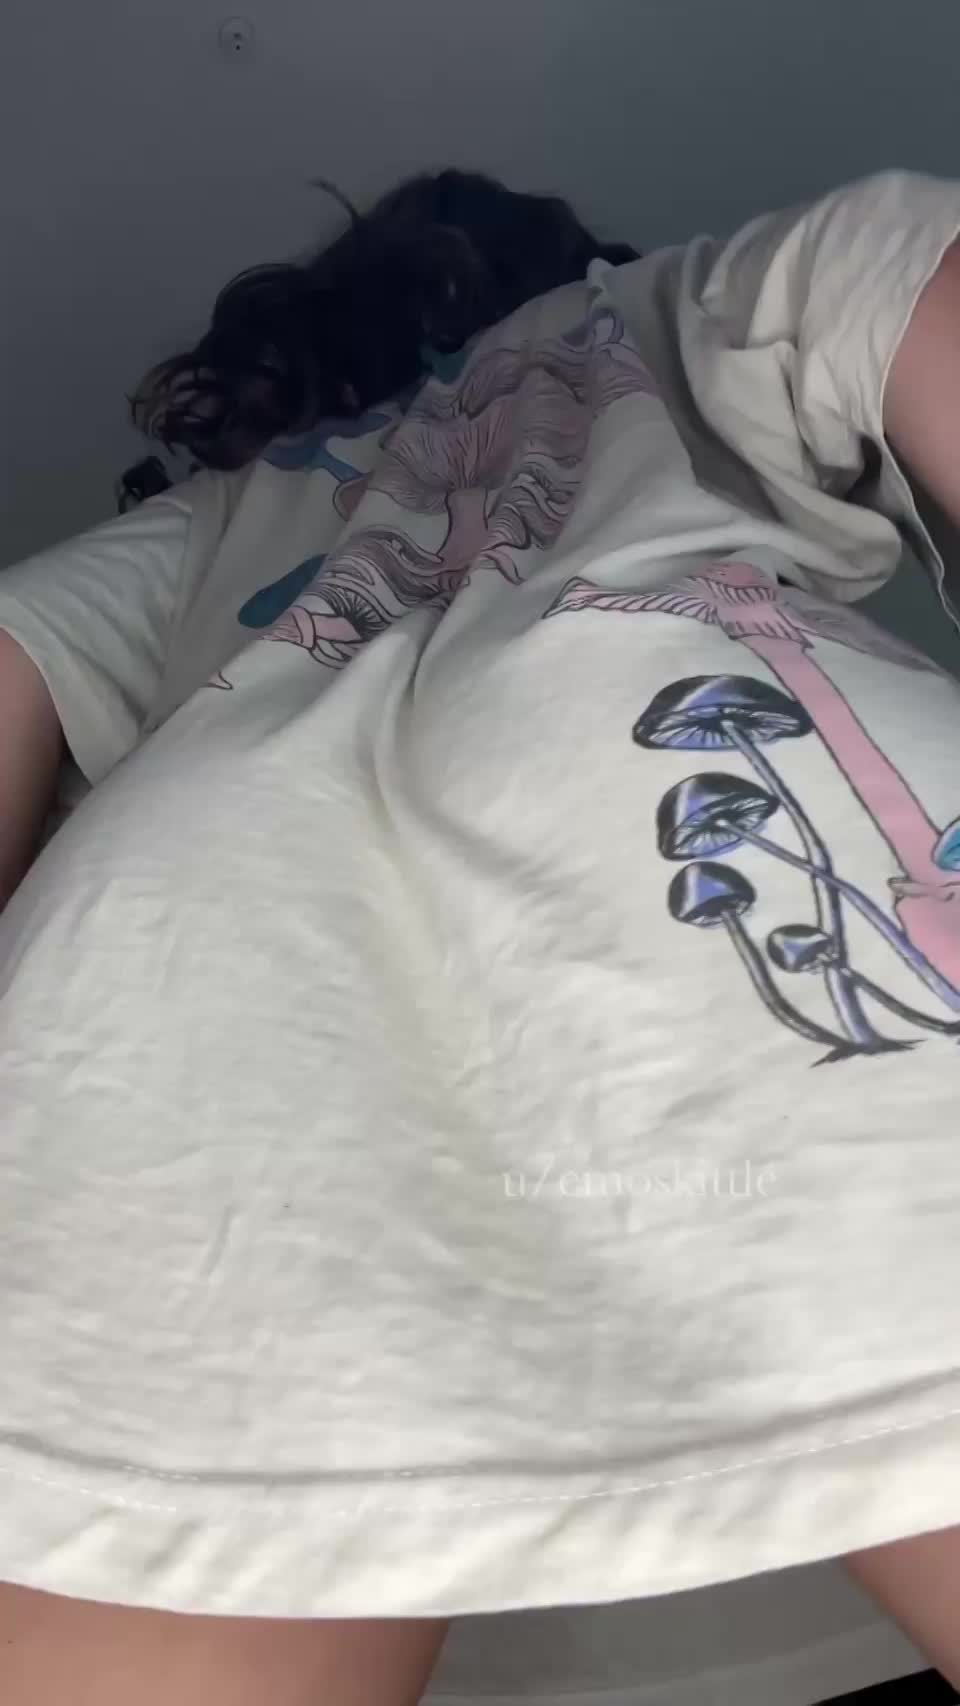 I'm ready to get filled with your cum : video clip